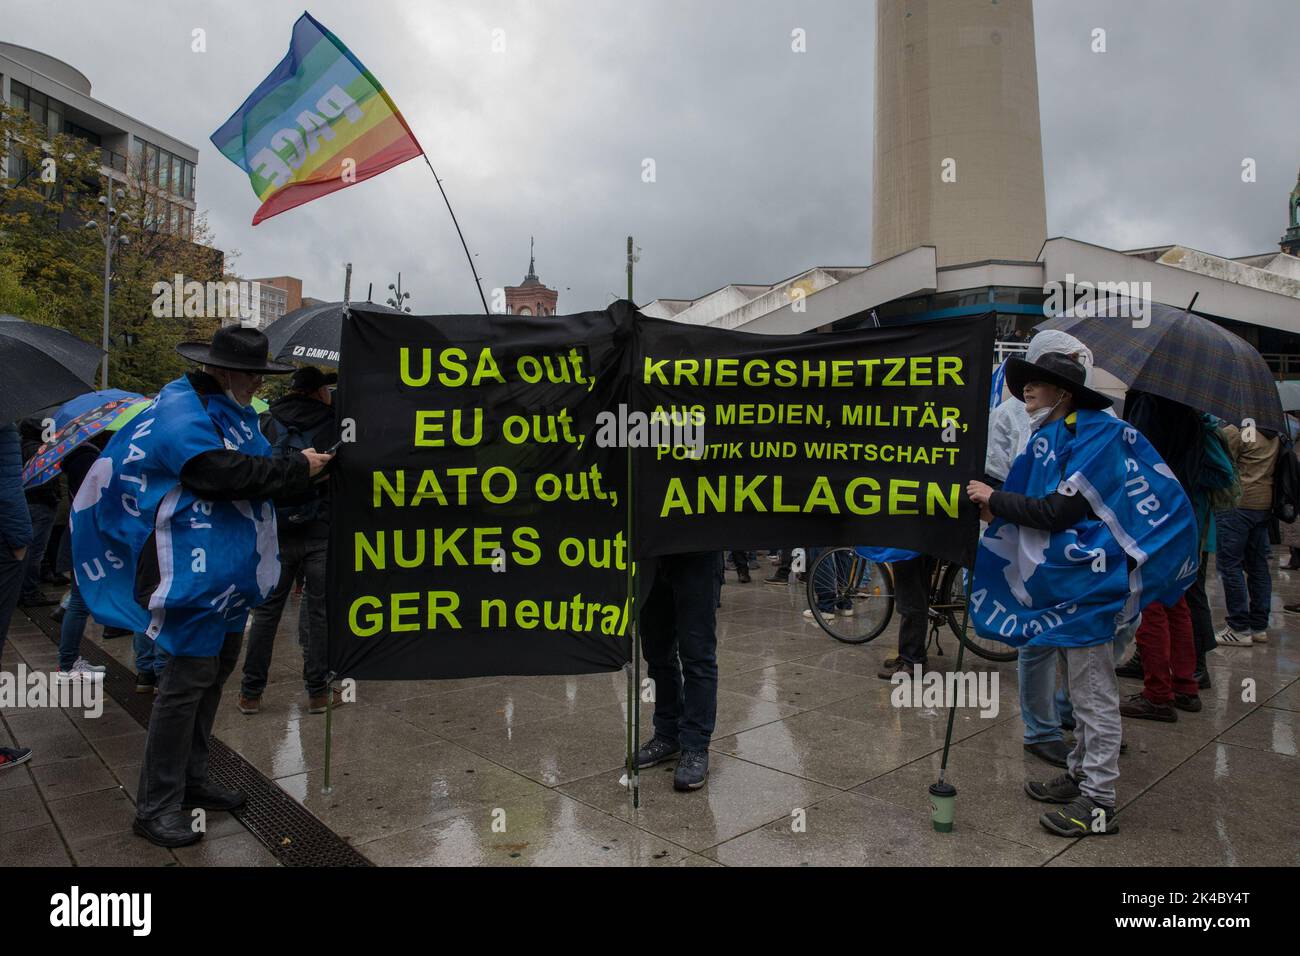 Berlin, Germany. 1st Oct, 2022. Protesters at a rally, which took place at the television tower in Berlin, on October 1, 2022. Employees of craft companies, as well as right-wing extremist activists, gathered at the rally. They demanded an immediate end to sanctions against Russia, called the U.S. a warmonger, and called for withdrawal from NATO and the entire government's resignation. (Credit Image: © Michael Kuenne/PRESSCOV via ZUMA Press Wire) Stock Photo